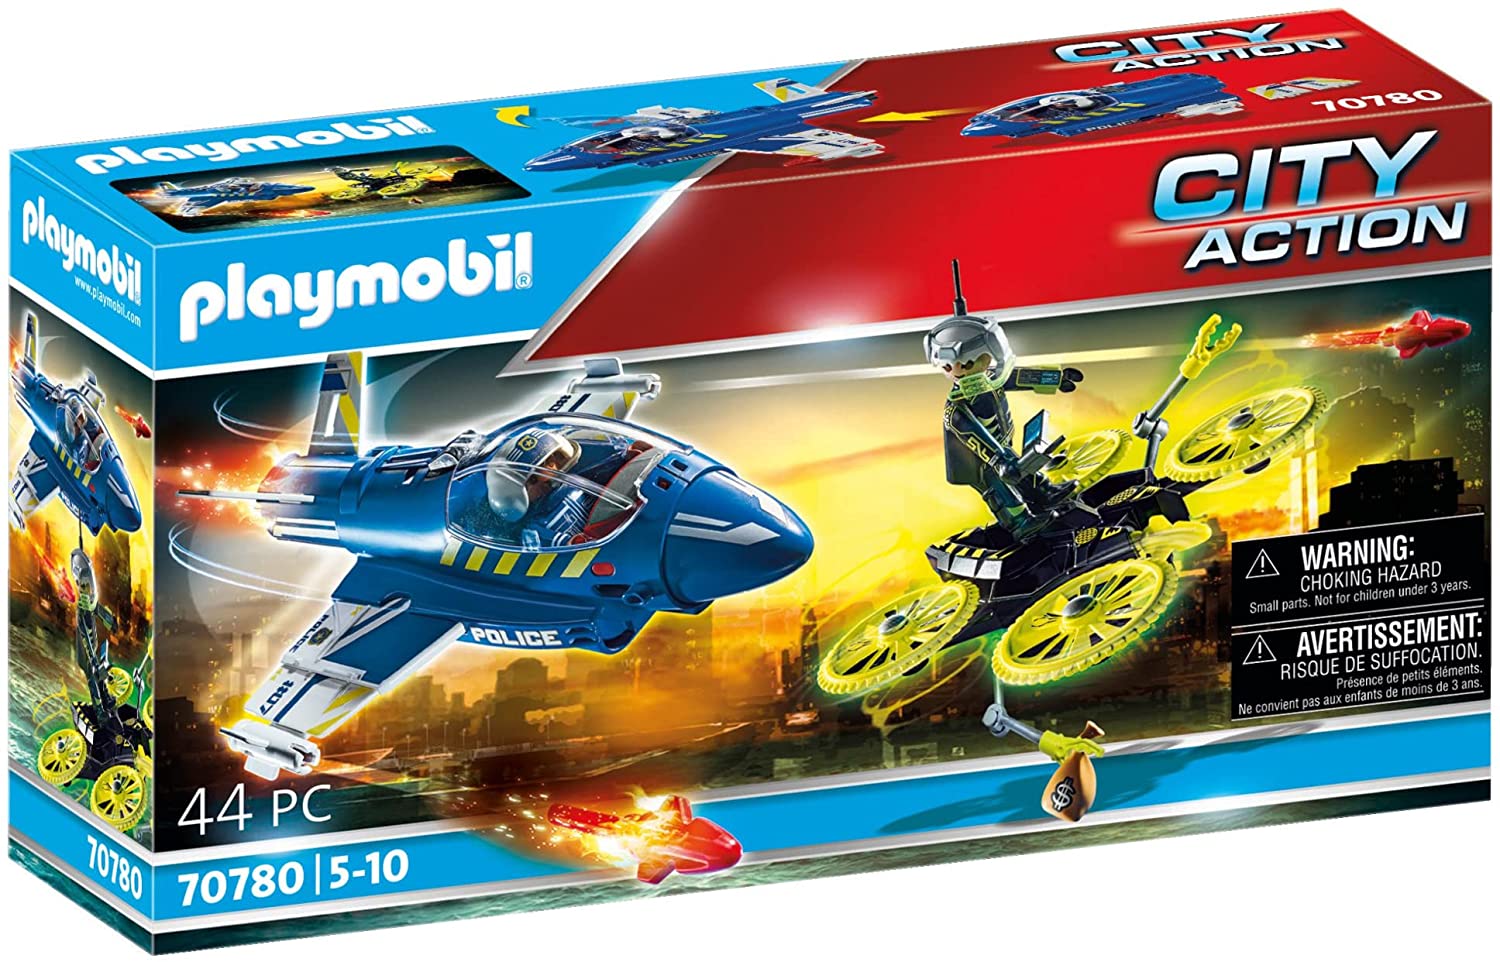 Playmobil Police Jet: Drone Tracking